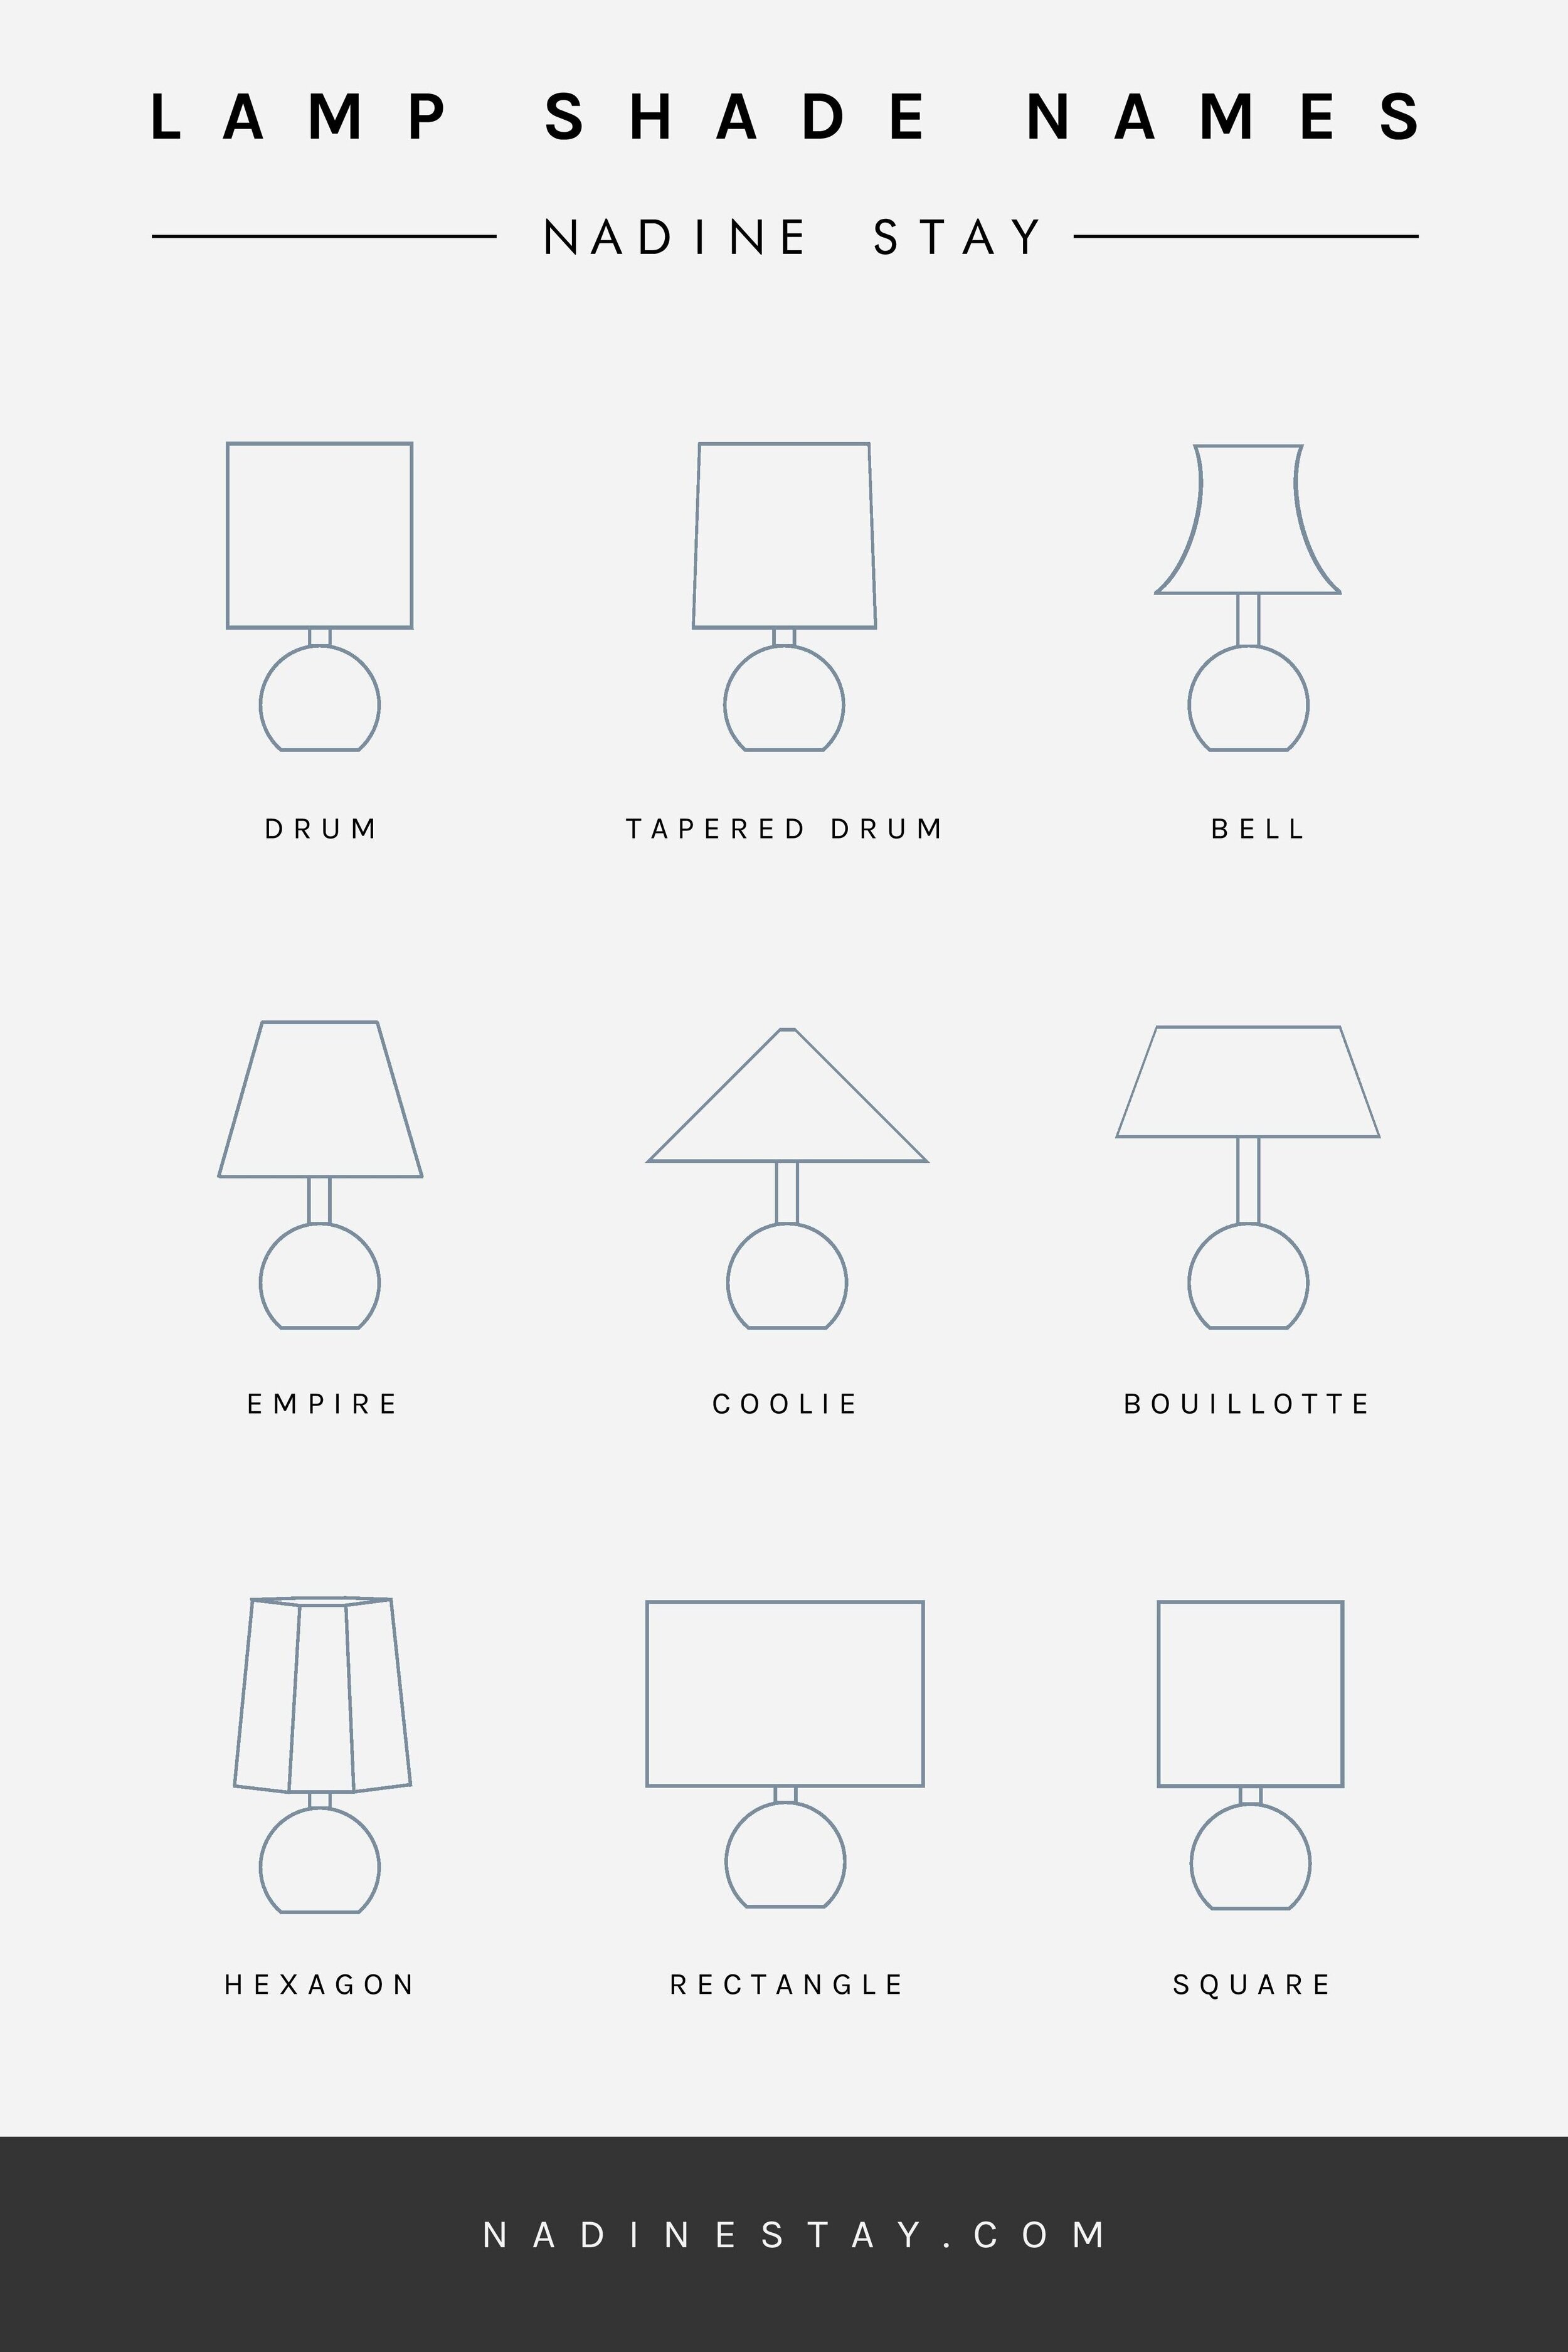 Lamp Shade Shapes and Names | Nadine Stay | Drum, tapered drum, bell, empire, coolie, cone, boillotte, hexagon, rectangle, and square lamp shades.